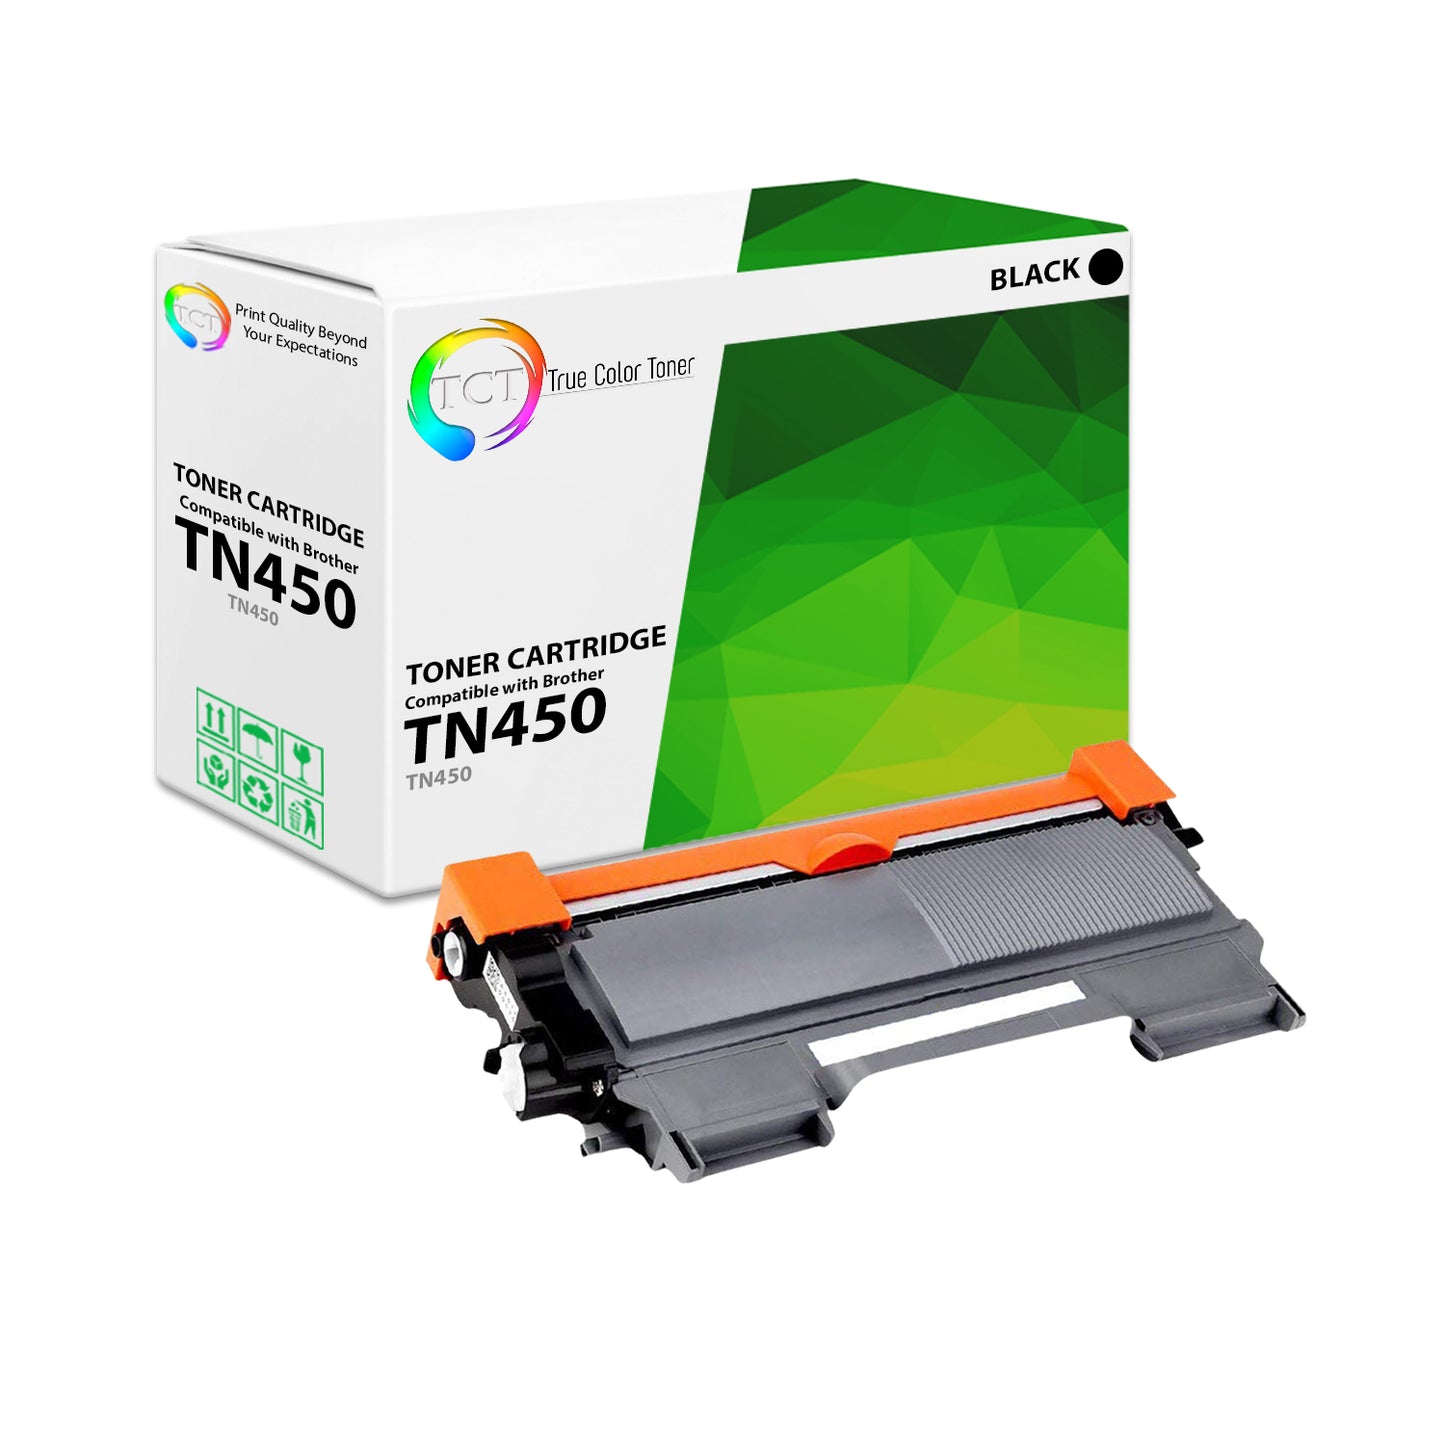 TCT Compatible High Yield Toner Cartridge Replacement for the Brother TN450 Series - 1 Pack Black